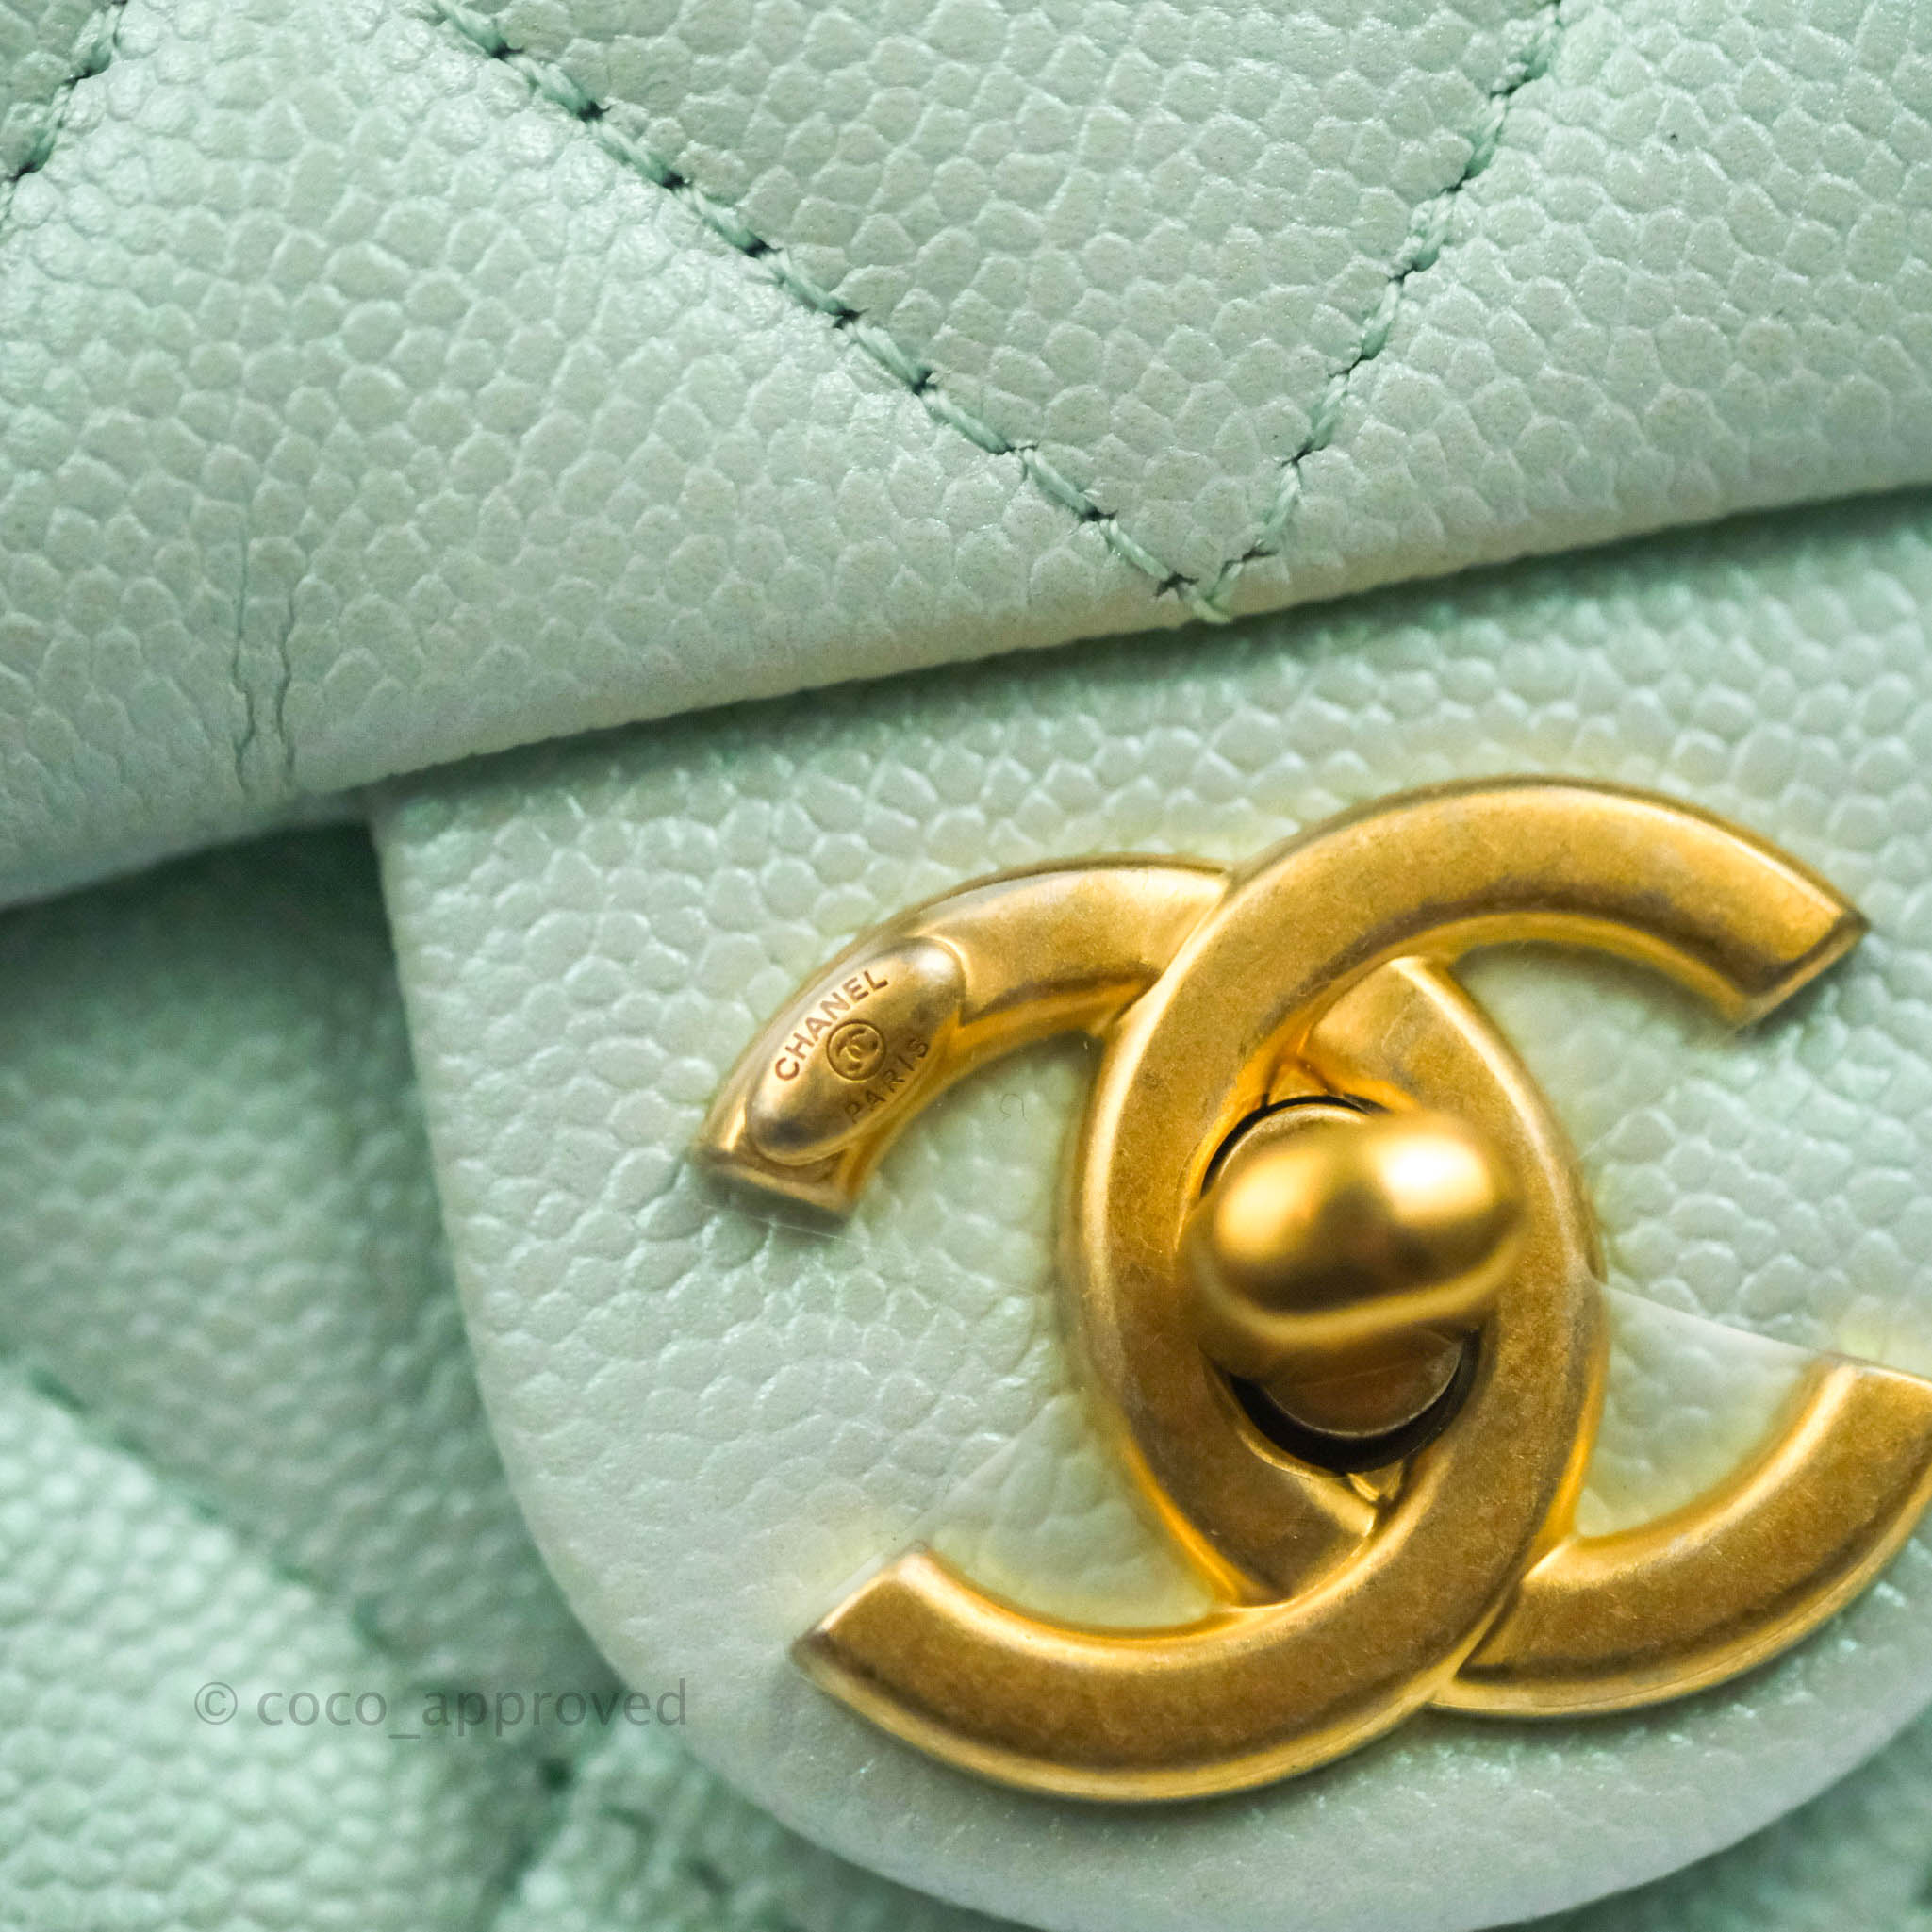 Chanel My Perfect Mini Flap, Blue Iridescent Caviar Leather, Gold Hardware,  As New in Box MA001